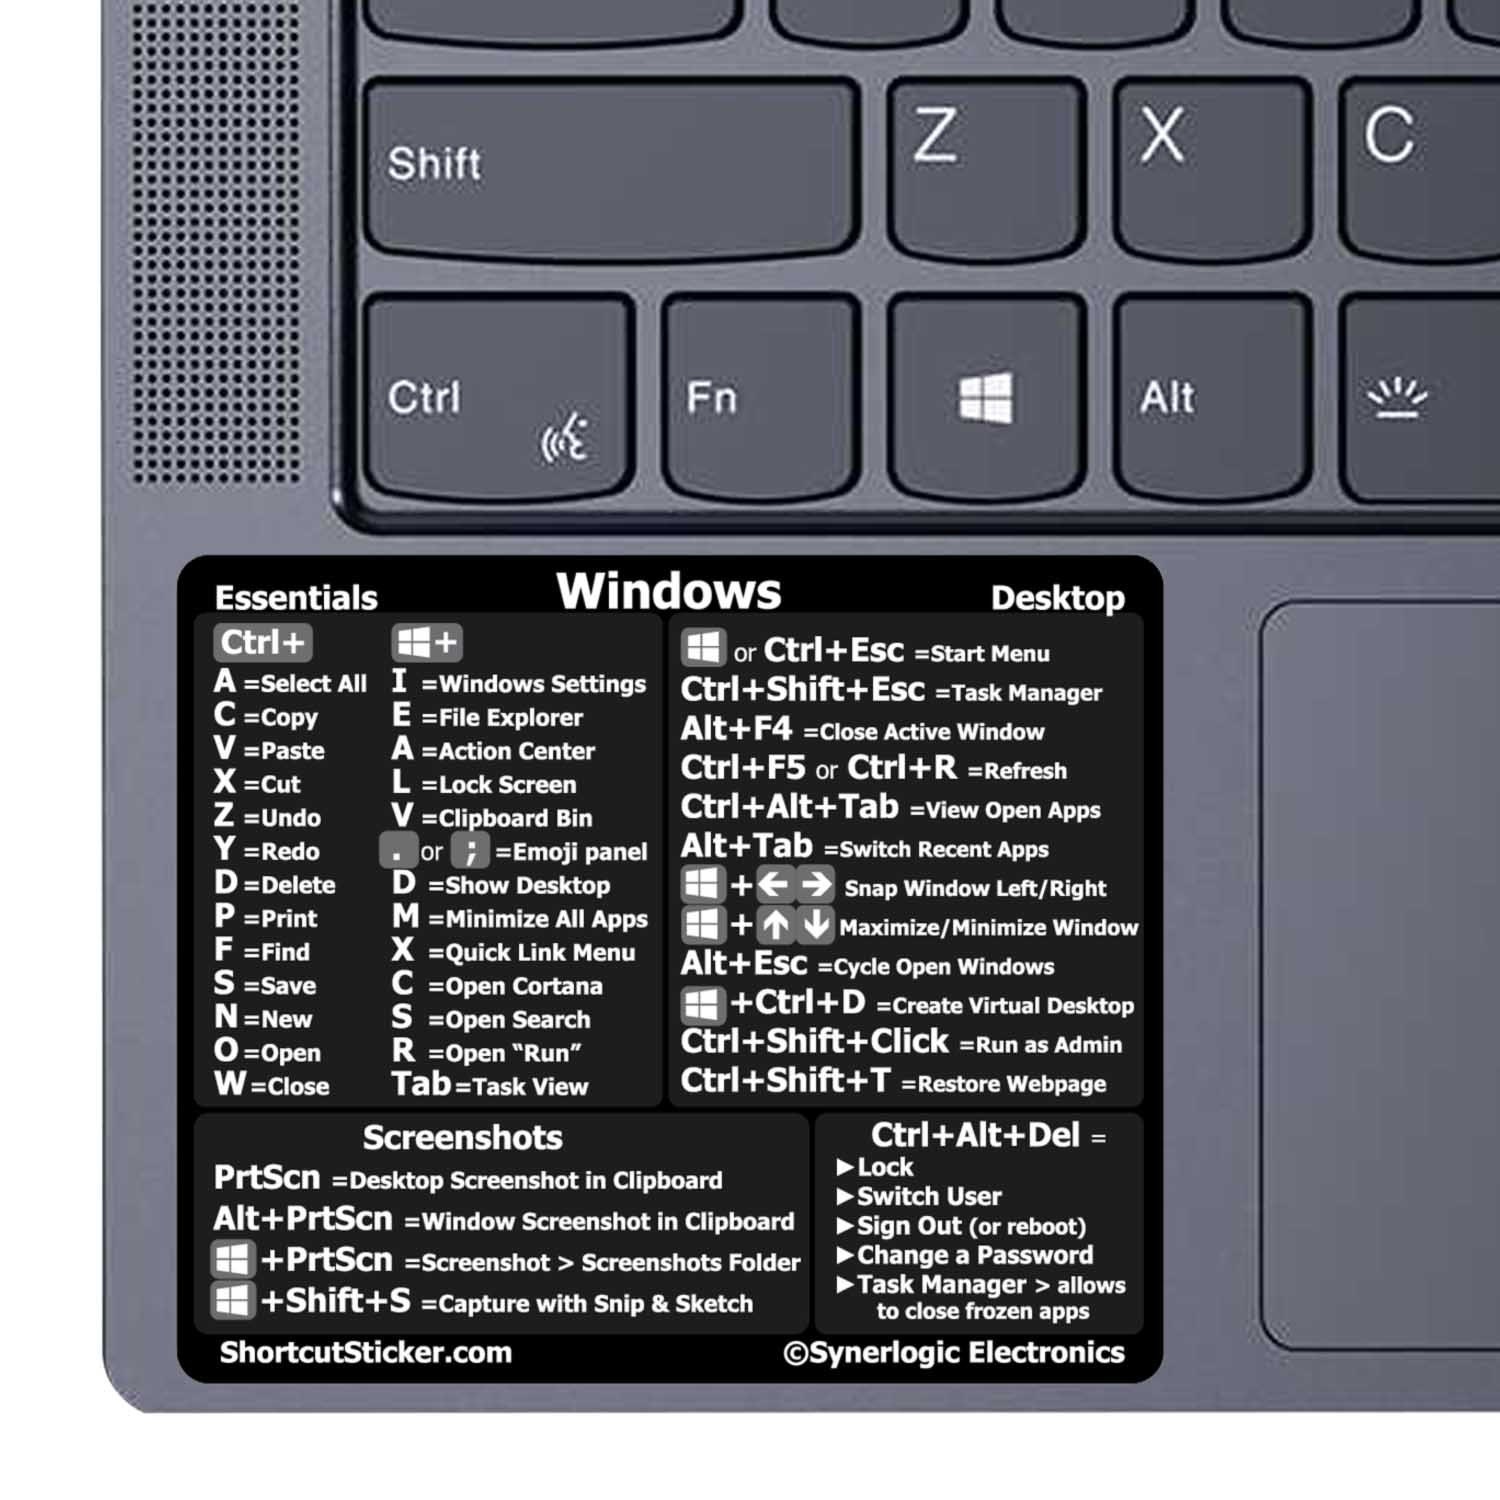 Buy Windows PC Reference Guide Keyboard Shortcut No-residue Online in India  - Etsy